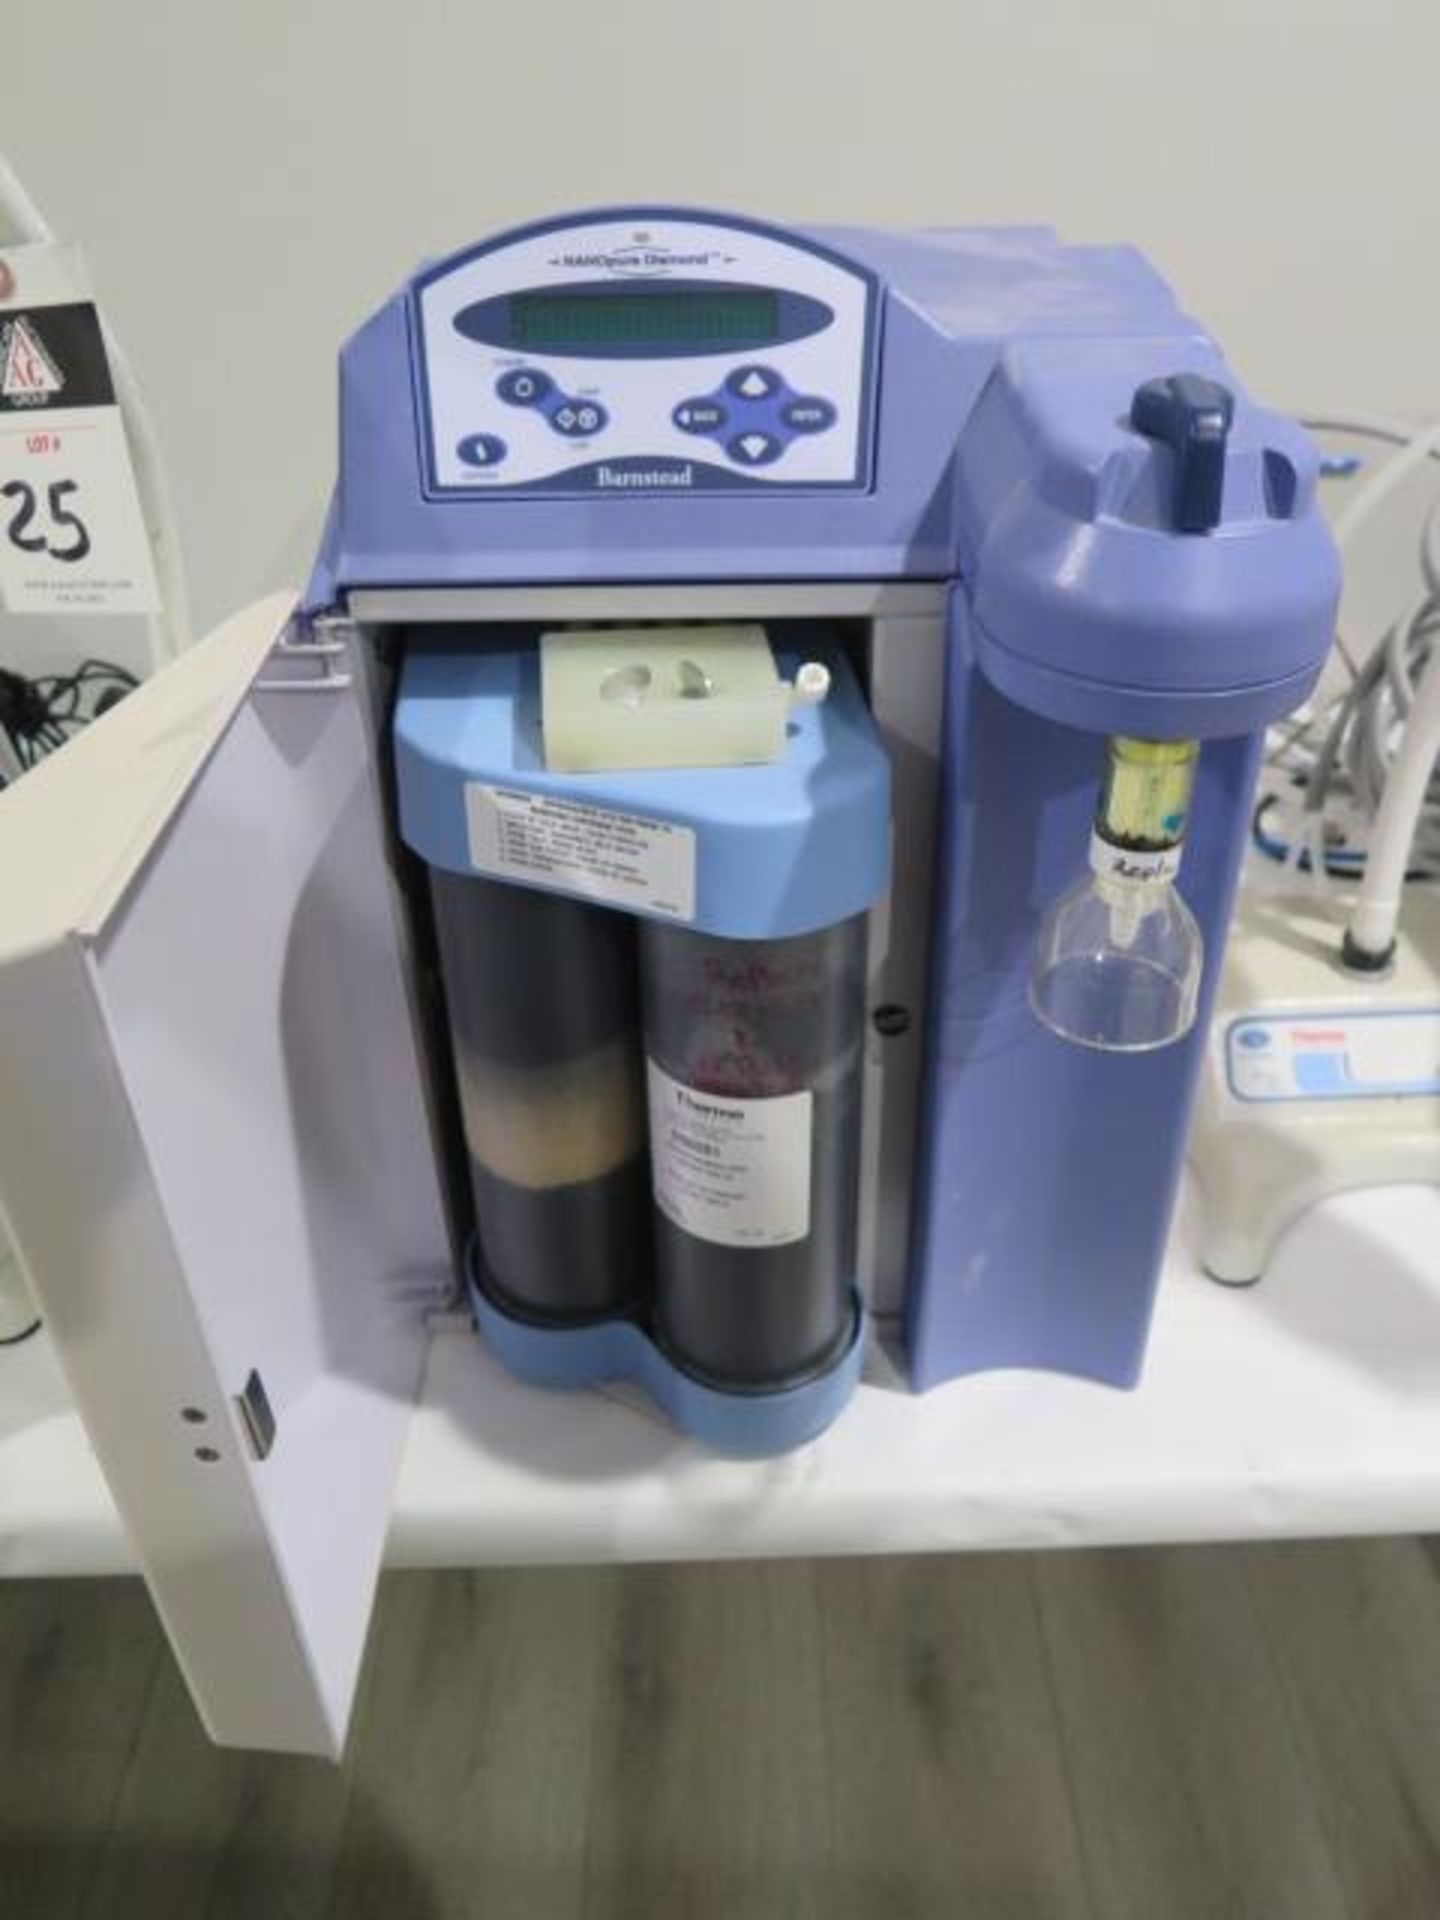 Barnstead NANOpure Diamond Water Purification System w/ TS Accudispense Volumetric Disp, SOLD AS IS - Image 5 of 9